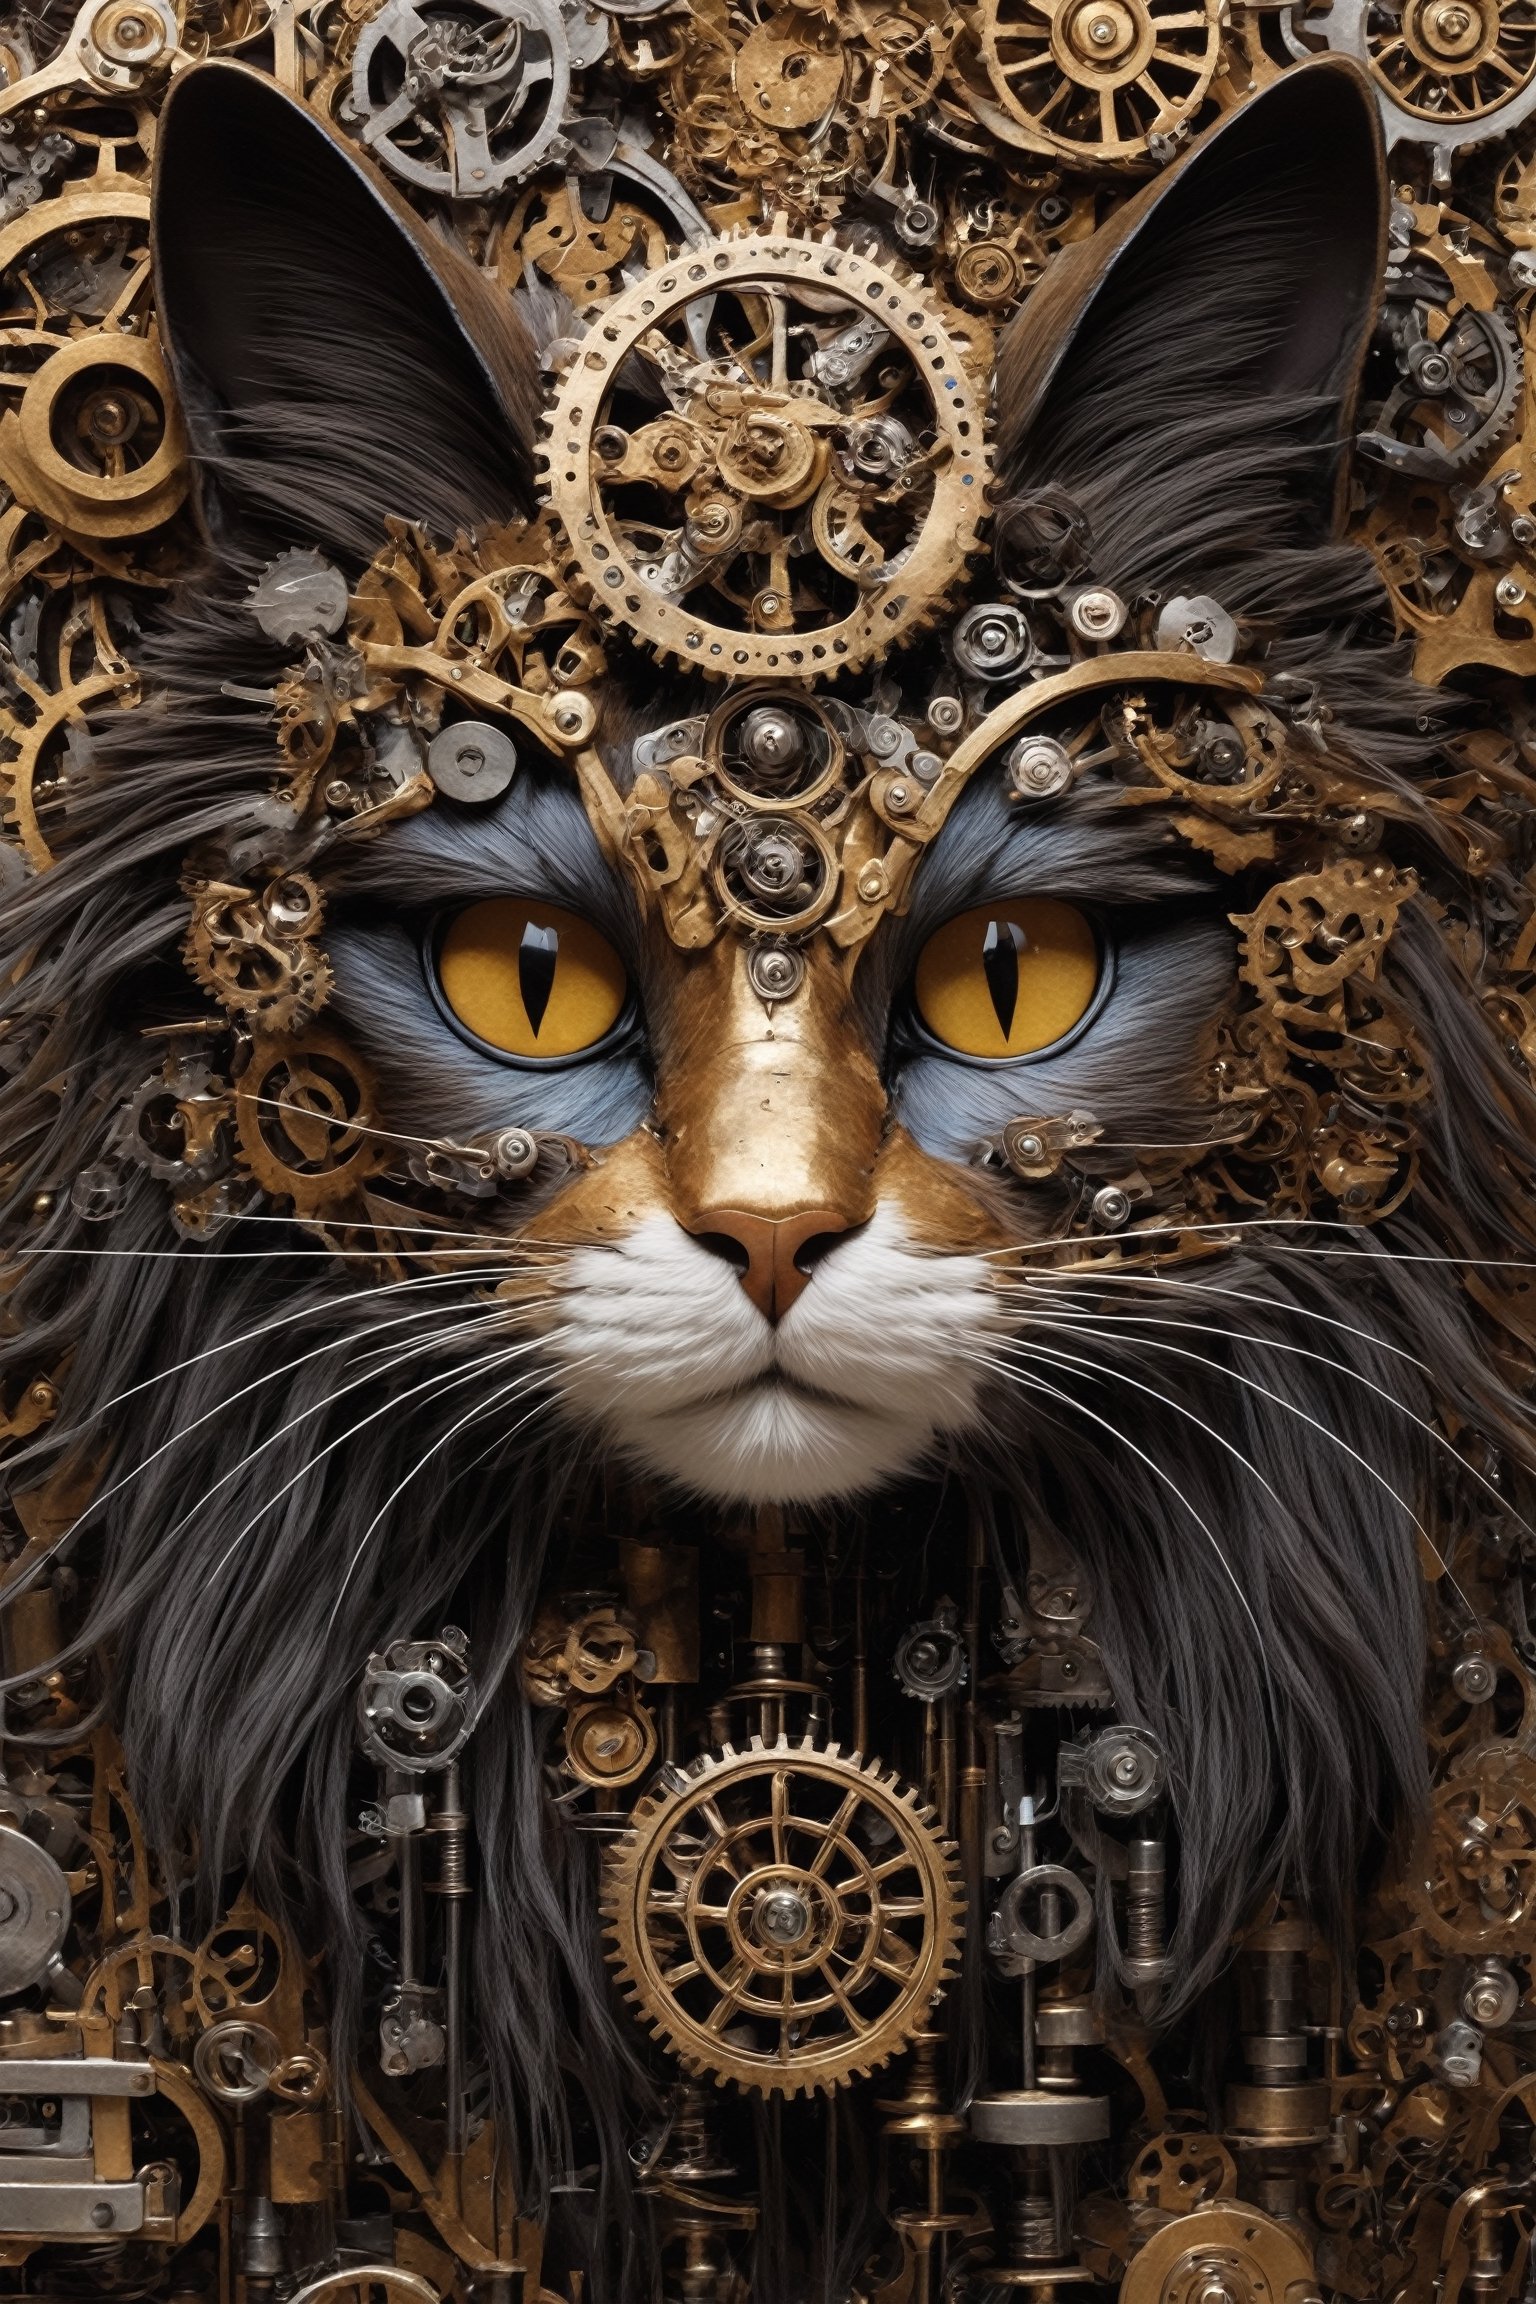  assembly art,A long-haired cat's face drawn with complex and innovative assembly art, a face constructed from steampunk items, beads and gears.